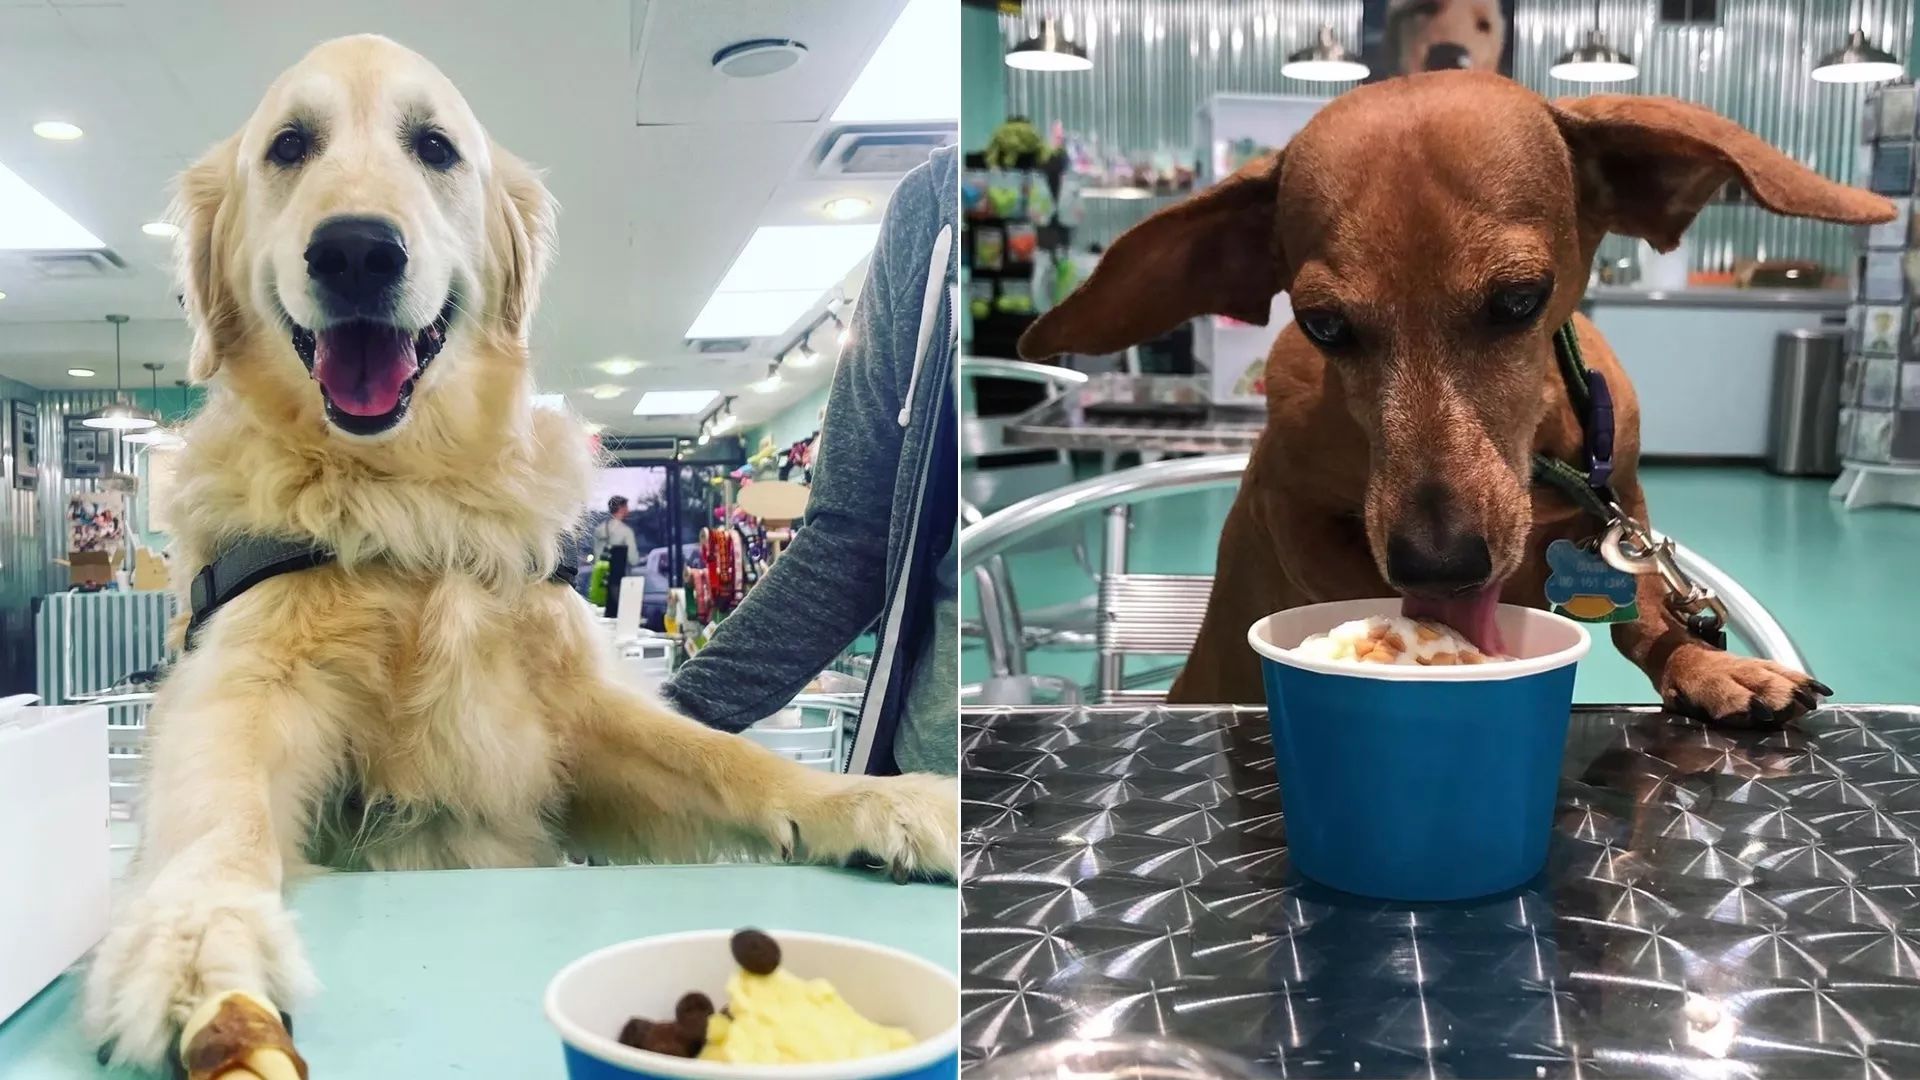 Two dogs eating ice cream that's meant for them.